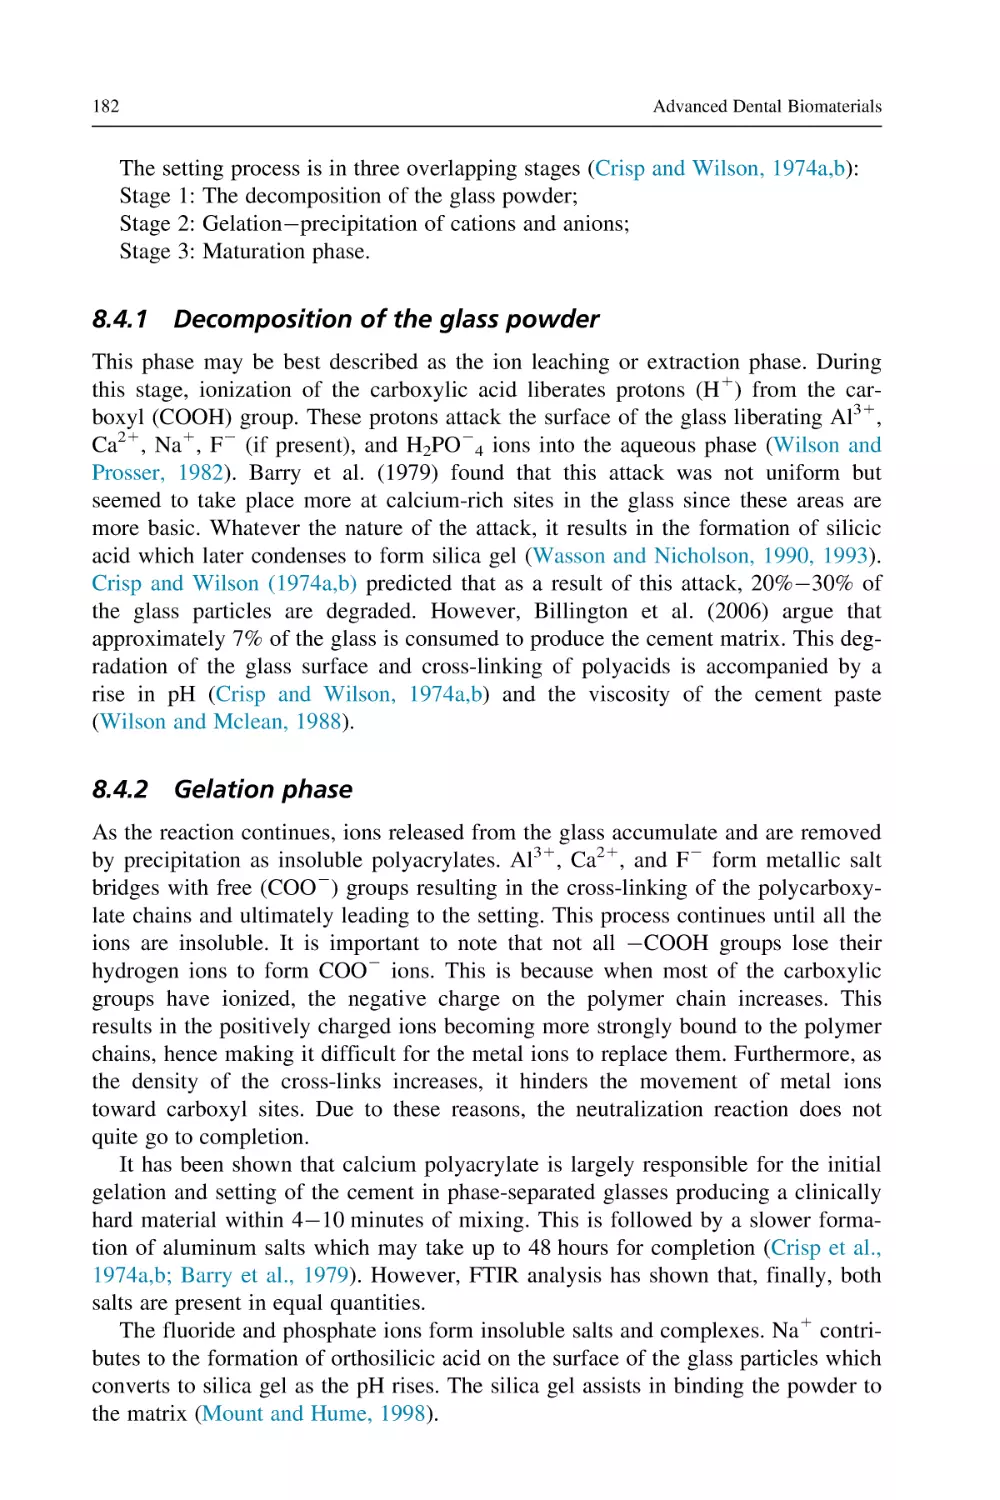 8.4.1 Decomposition of the glass powder
8.4.2 Gelation phase